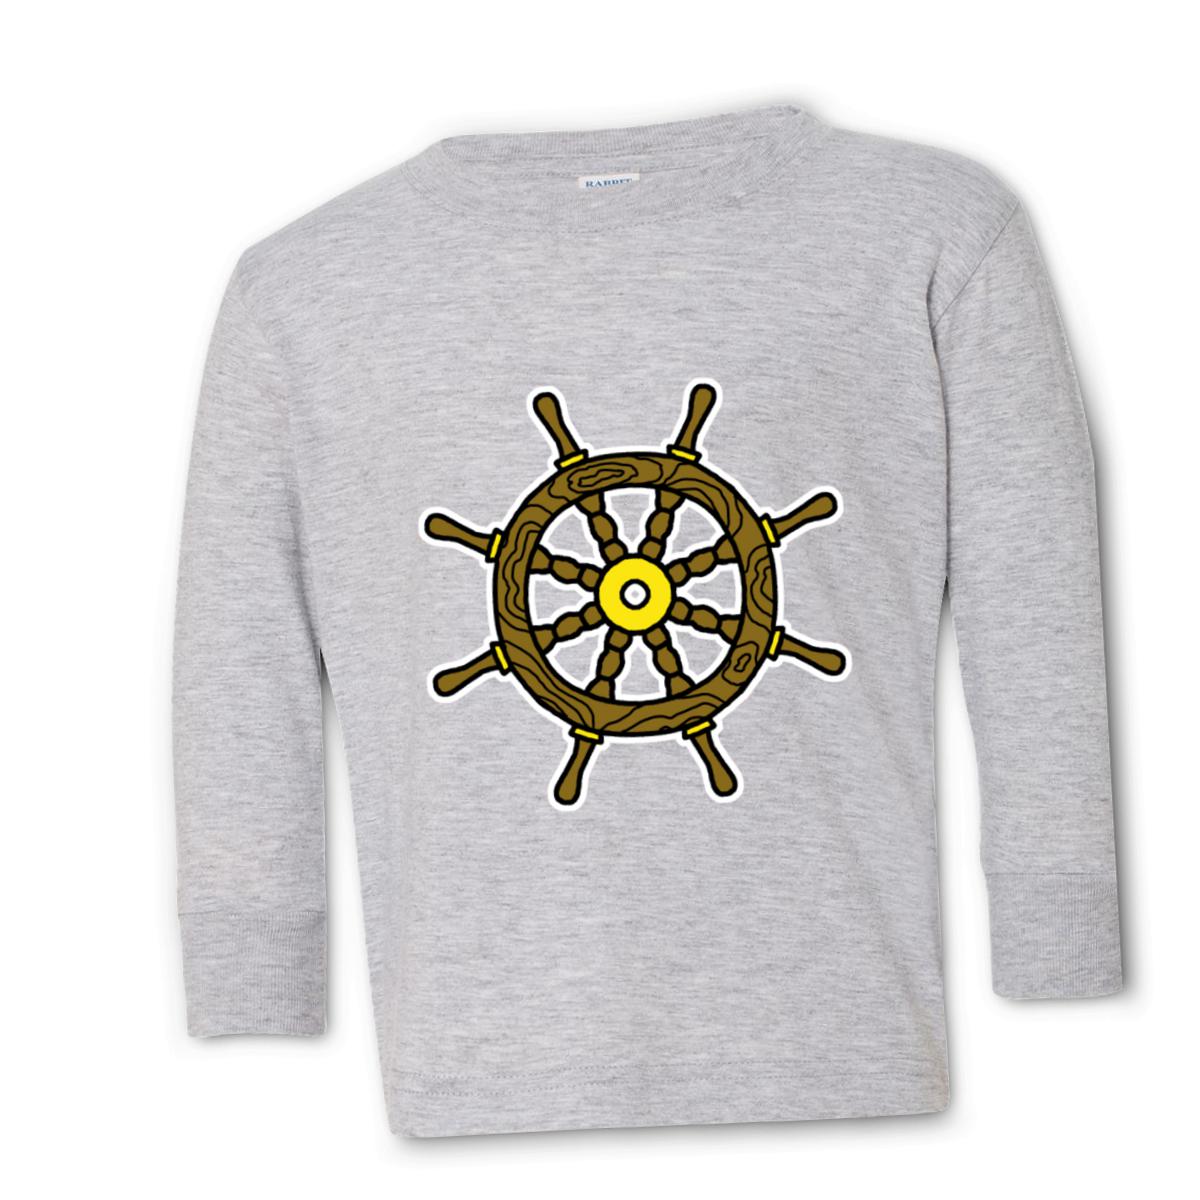 American Traditional Ship Wheel Toddler Long Sleeve Tee 4T heather